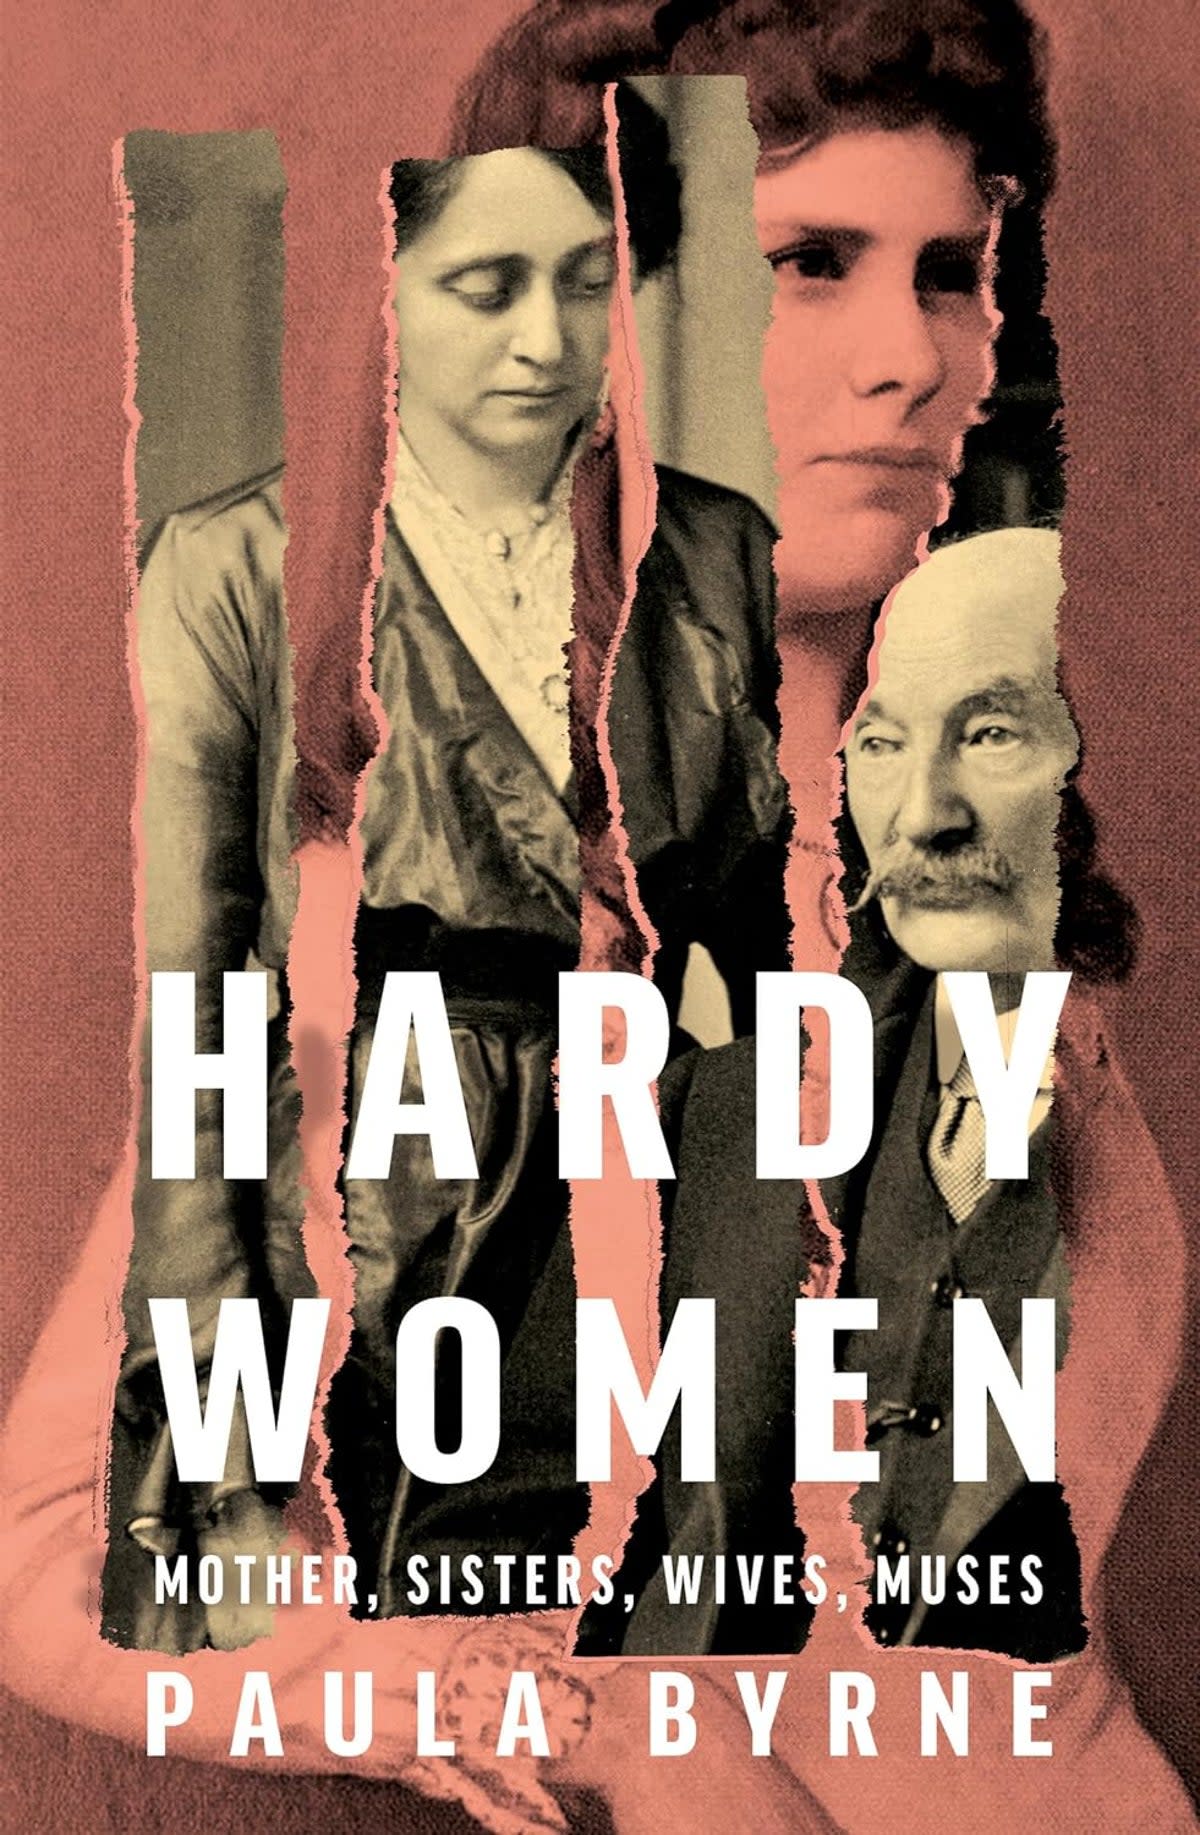 Biographer Paula Byrne turns her eye to the female figures that formed Thomas Hardy (source)